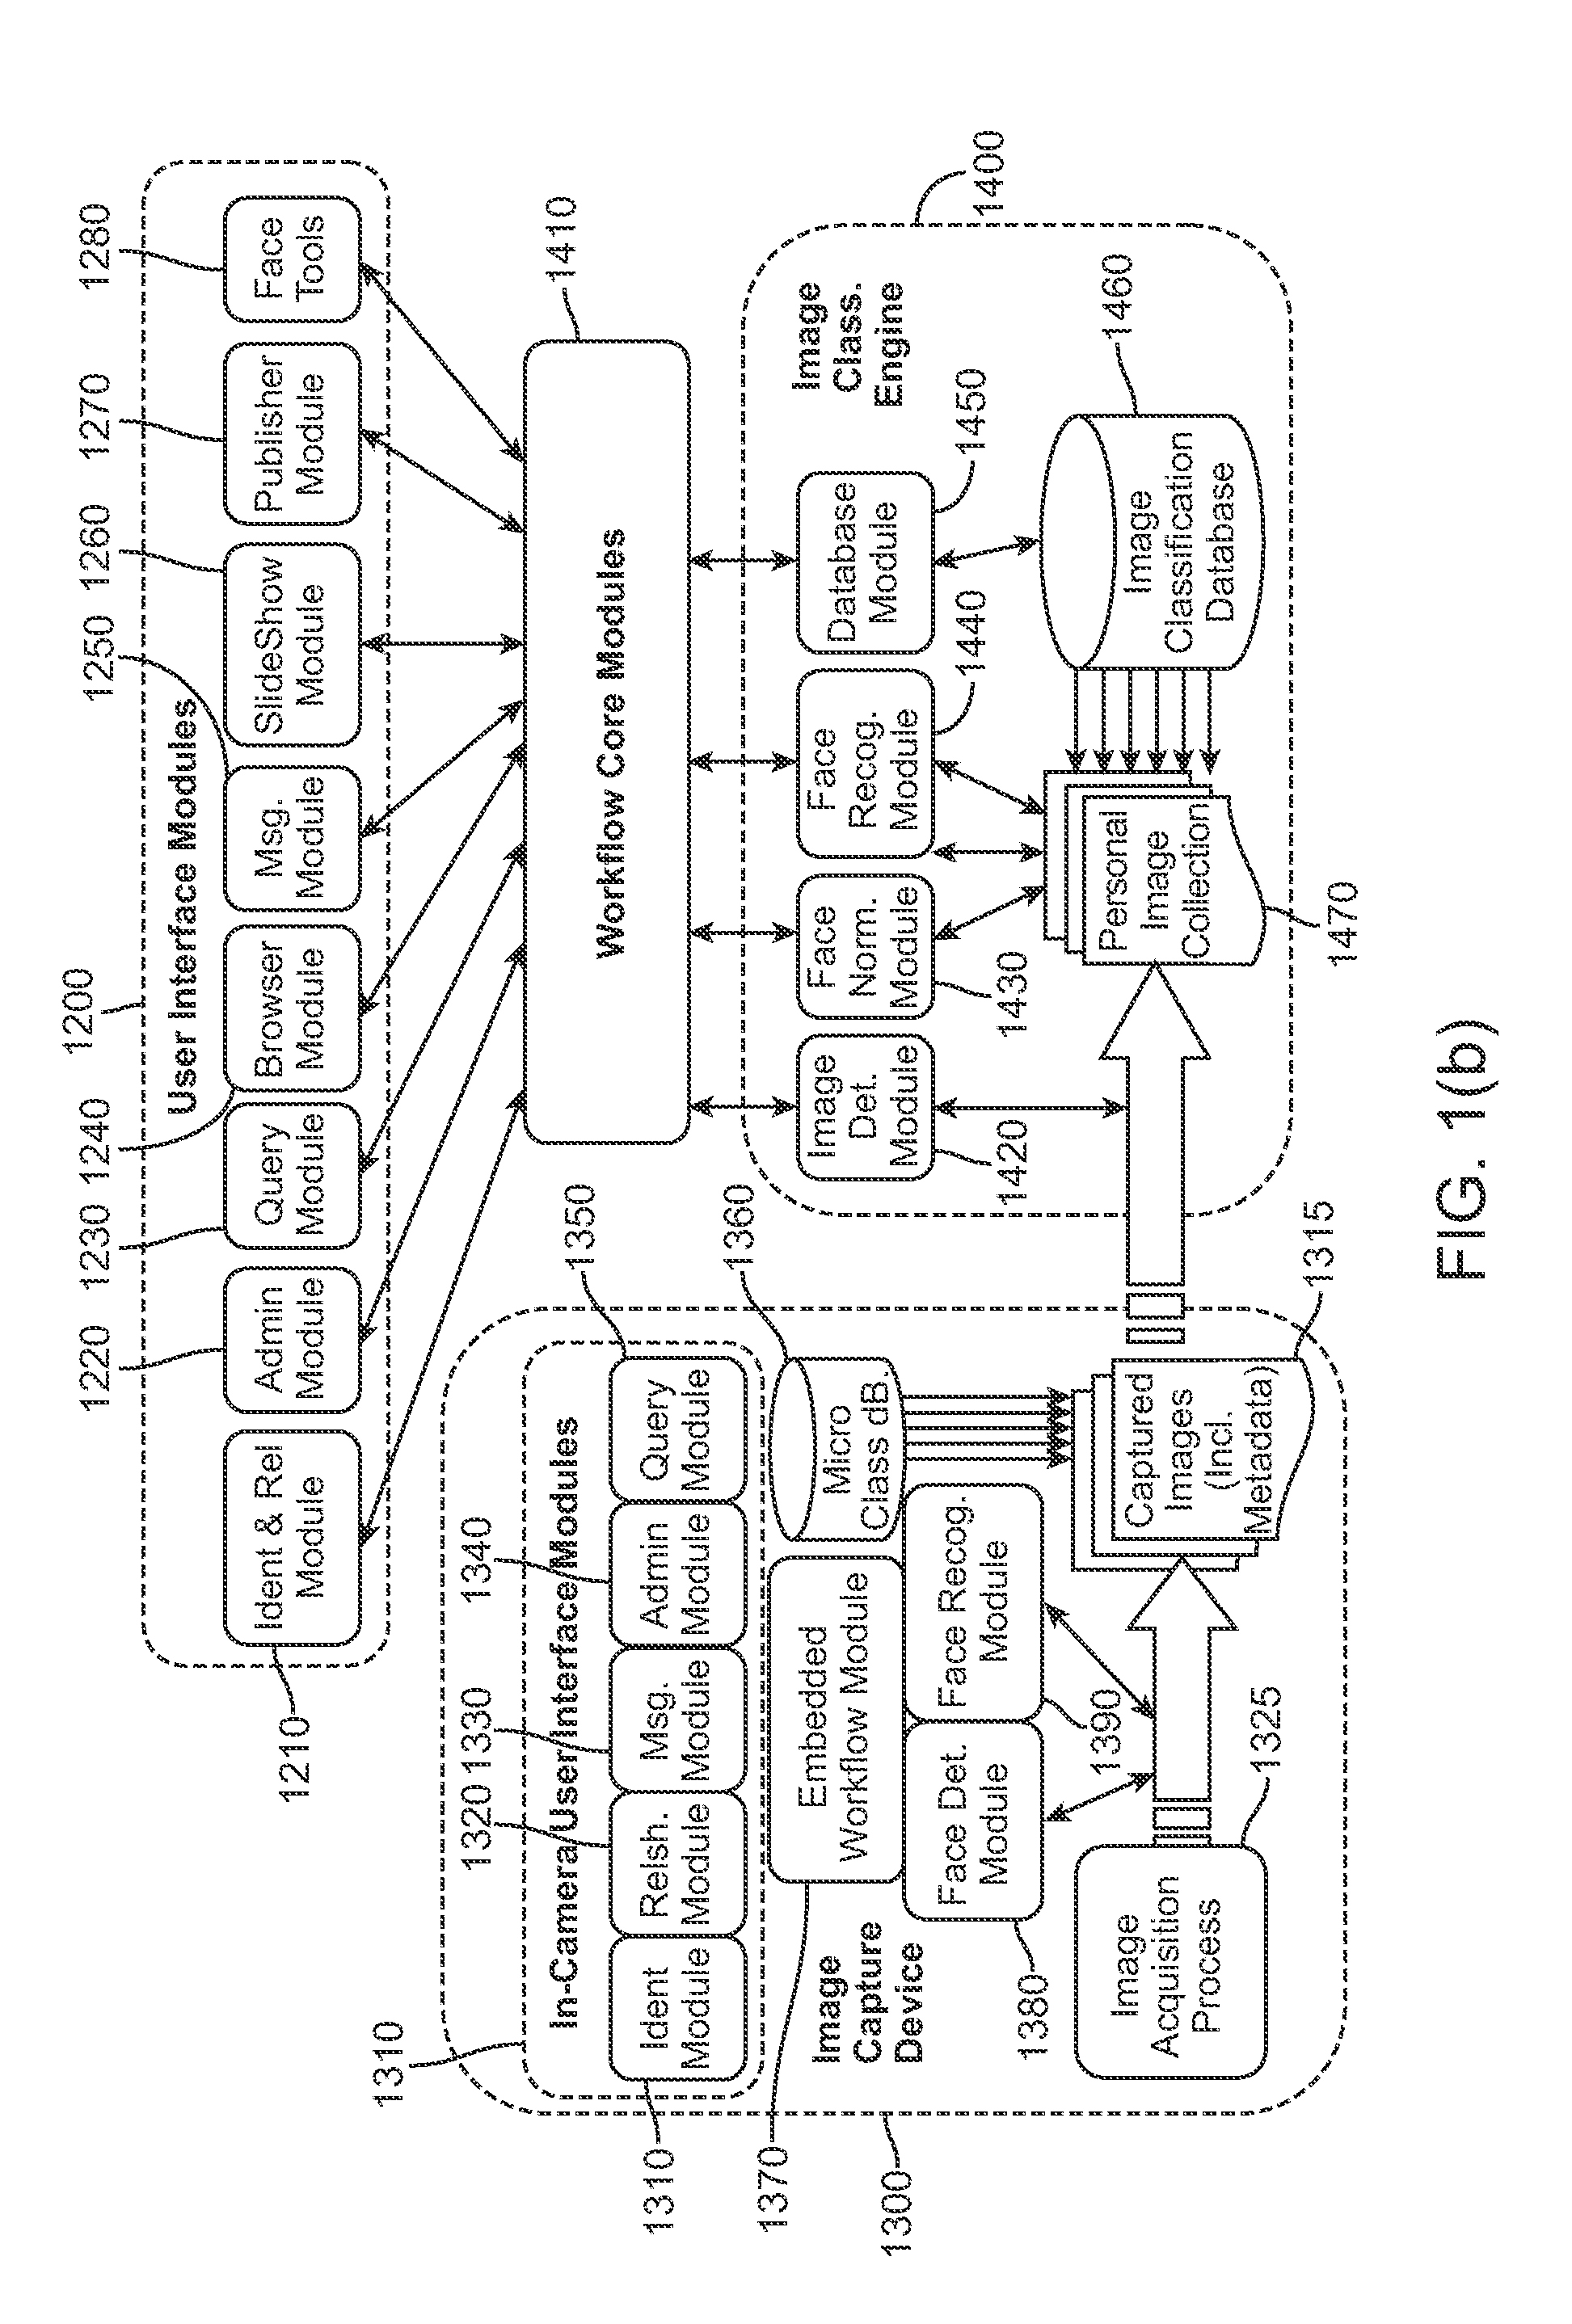 Classification and Organization of Consumer Digital Images Using Workflow, and Face Detection and Recognition